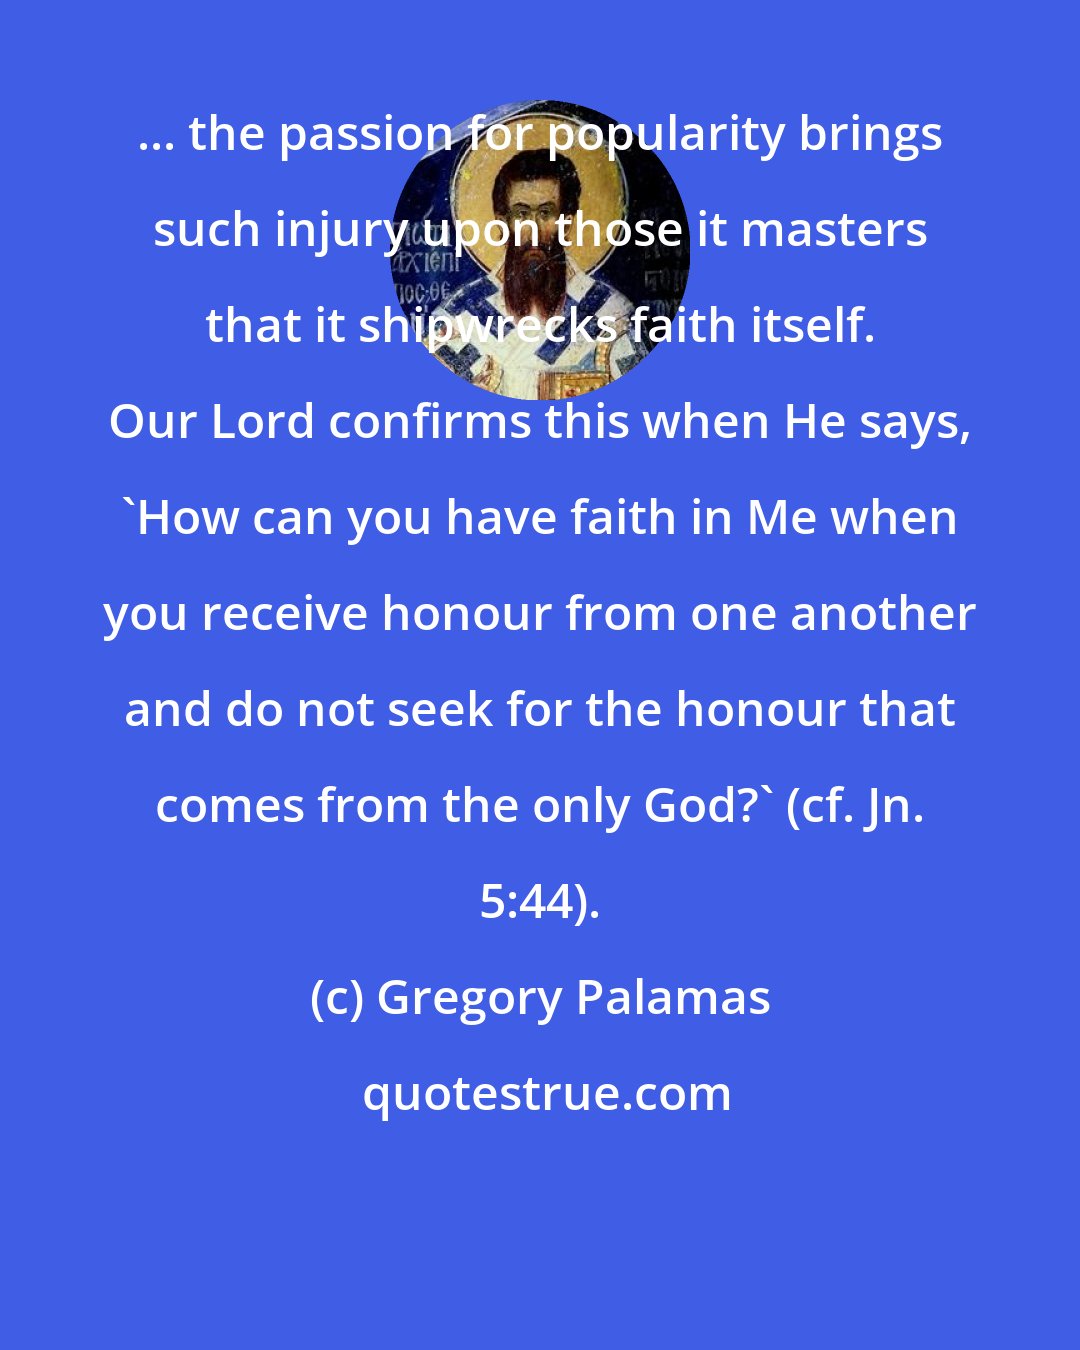 Gregory Palamas: ... the passion for popularity brings such injury upon those it masters that it shipwrecks faith itself. Our Lord confirms this when He says, 'How can you have faith in Me when you receive honour from one another and do not seek for the honour that comes from the only God?' (cf. Jn. 5:44).